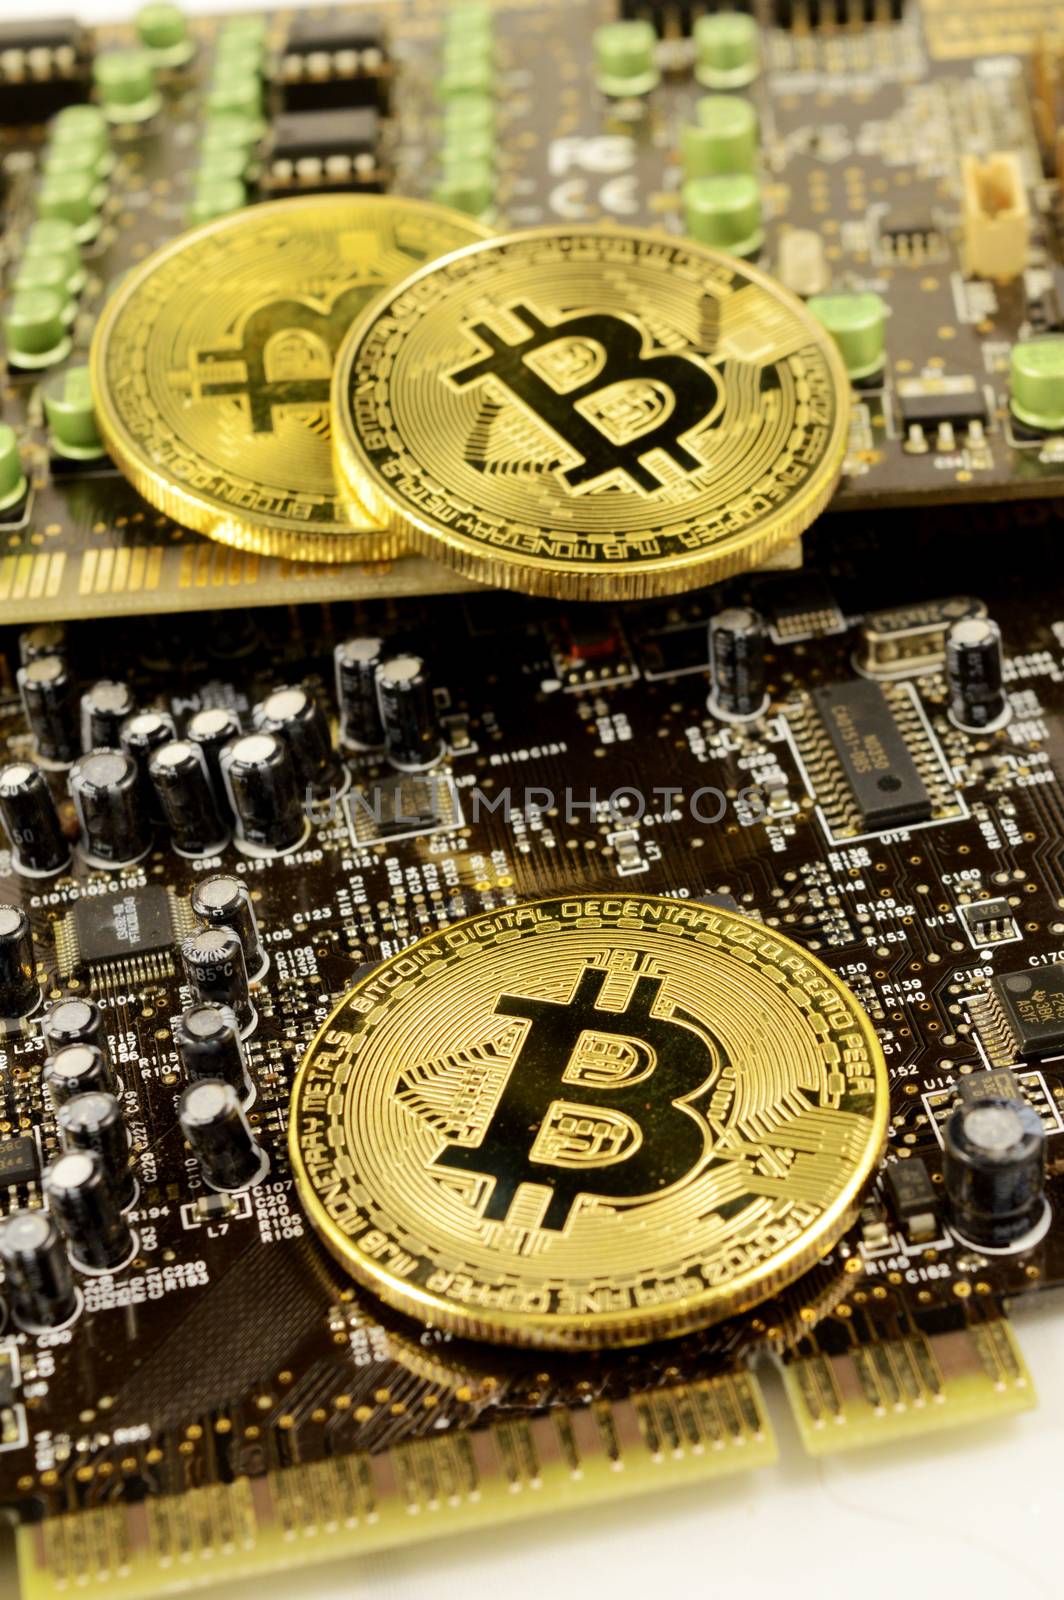 Closeup view of Bitcoins resting on top of a circuit board for showing the digital cryptocurrency details.